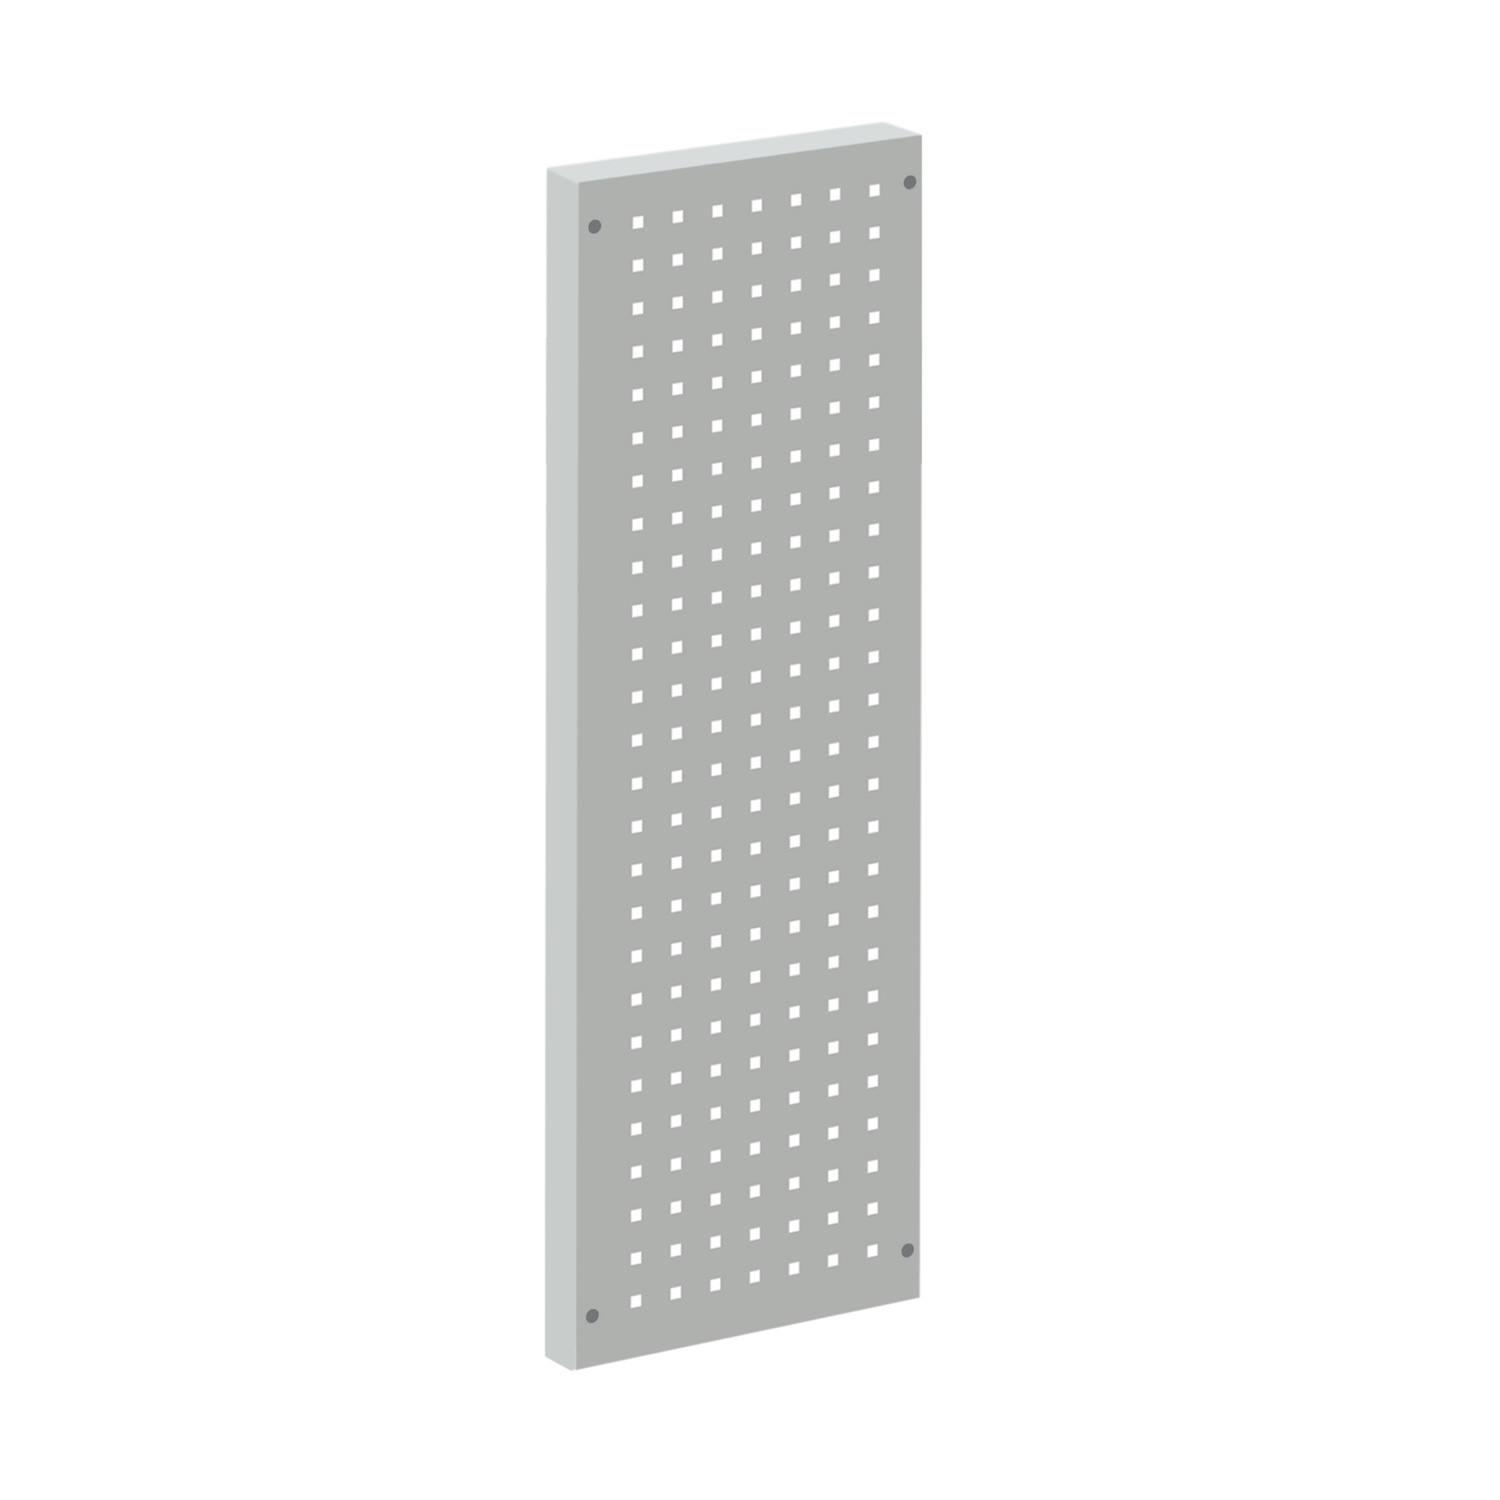 Lagere Squarepeg Partition Walling Panel (300mm)